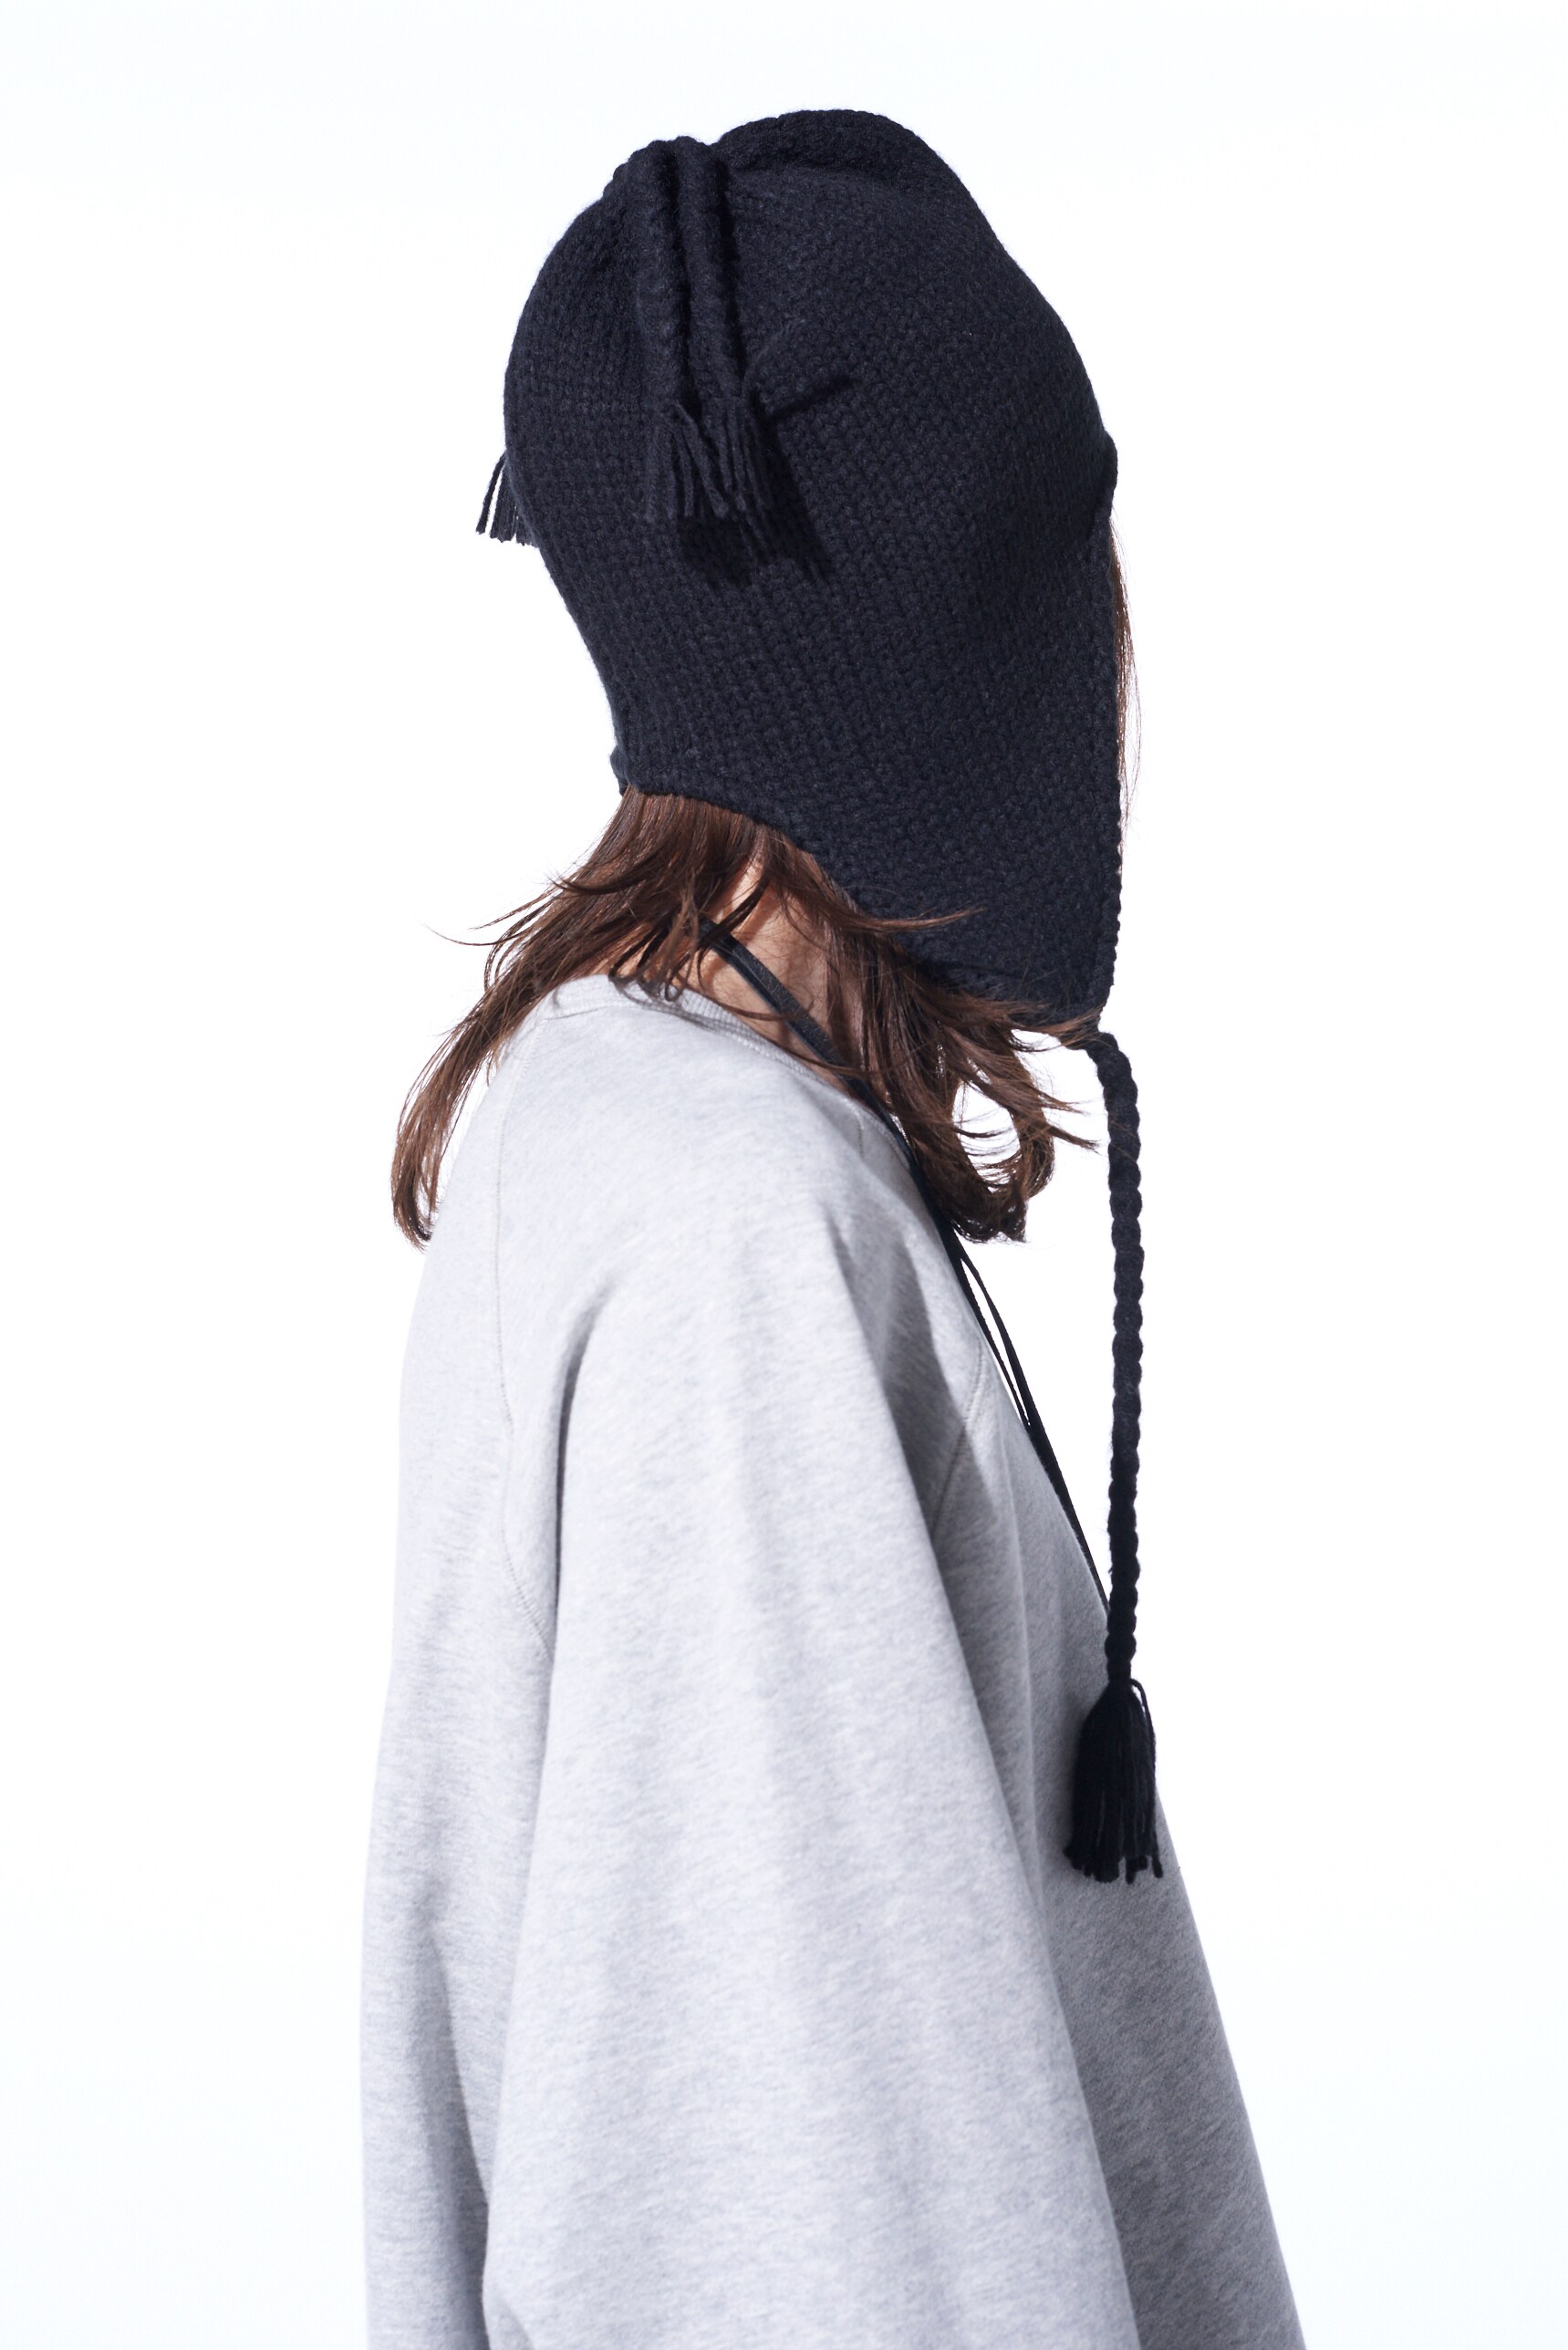 KNIT BEANIE WITH FRINGED EARPIECES